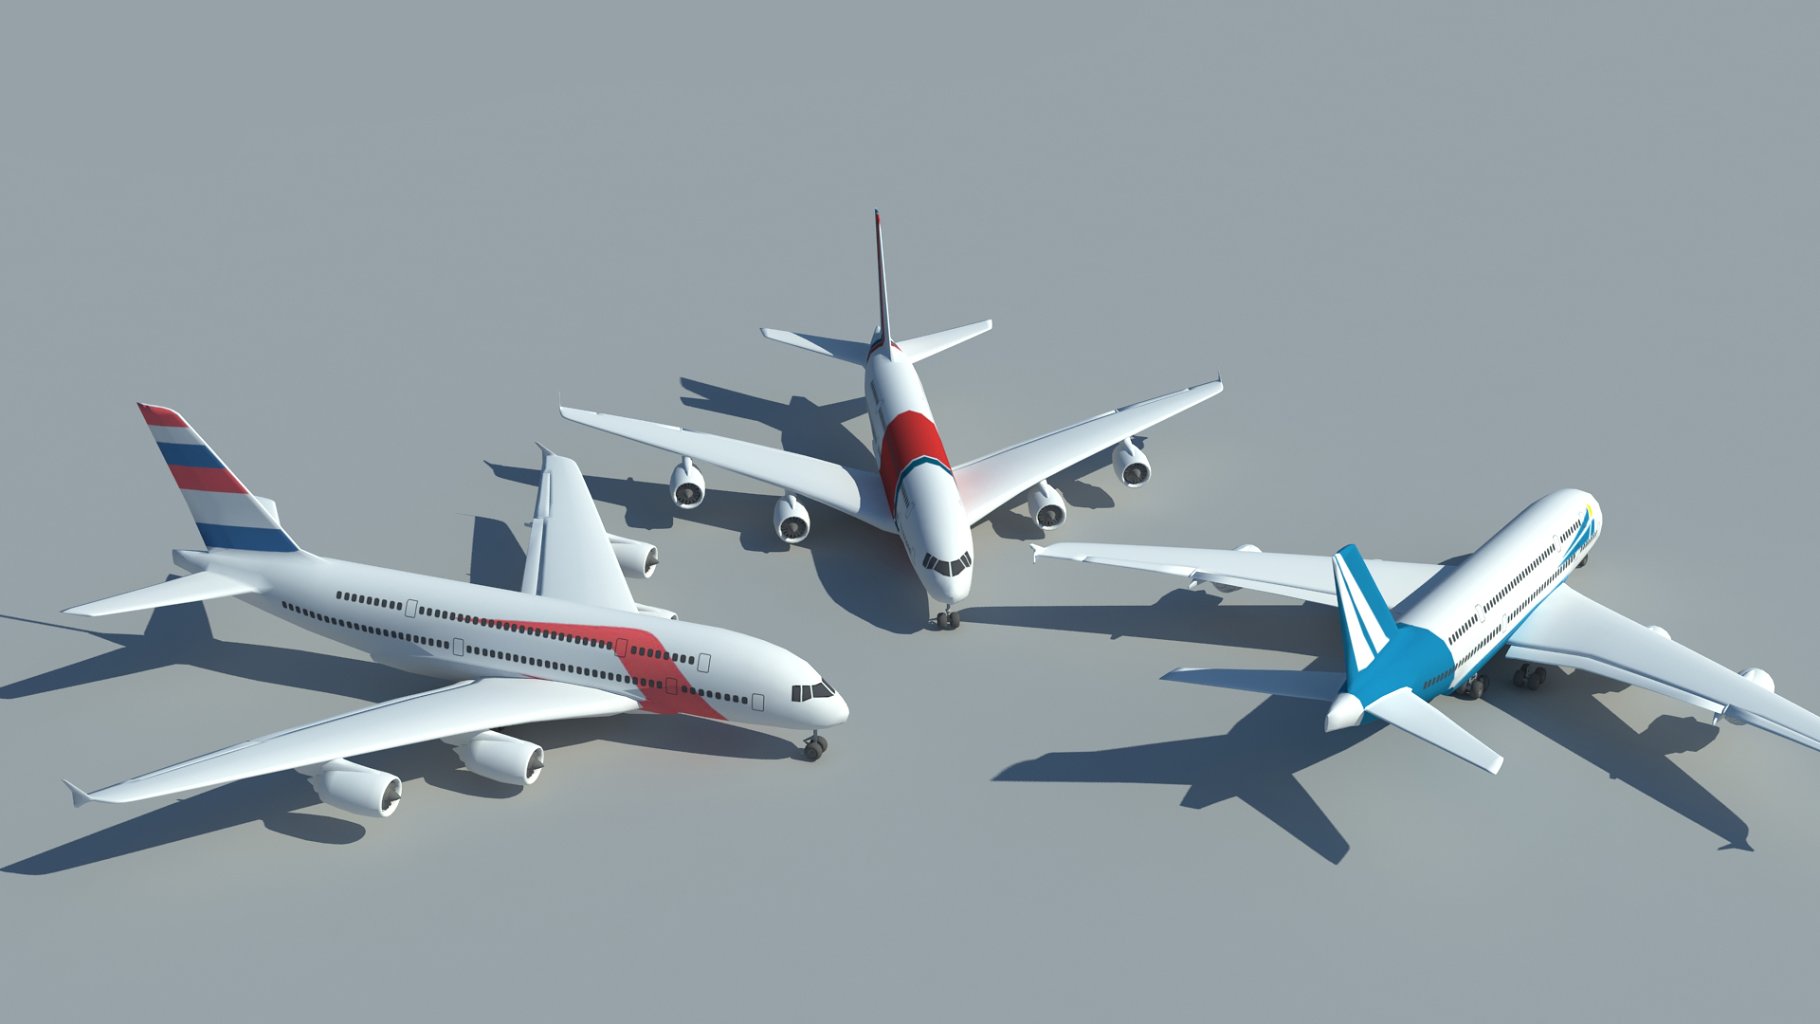 Rendering of amazing low poly 3d models of airplanes